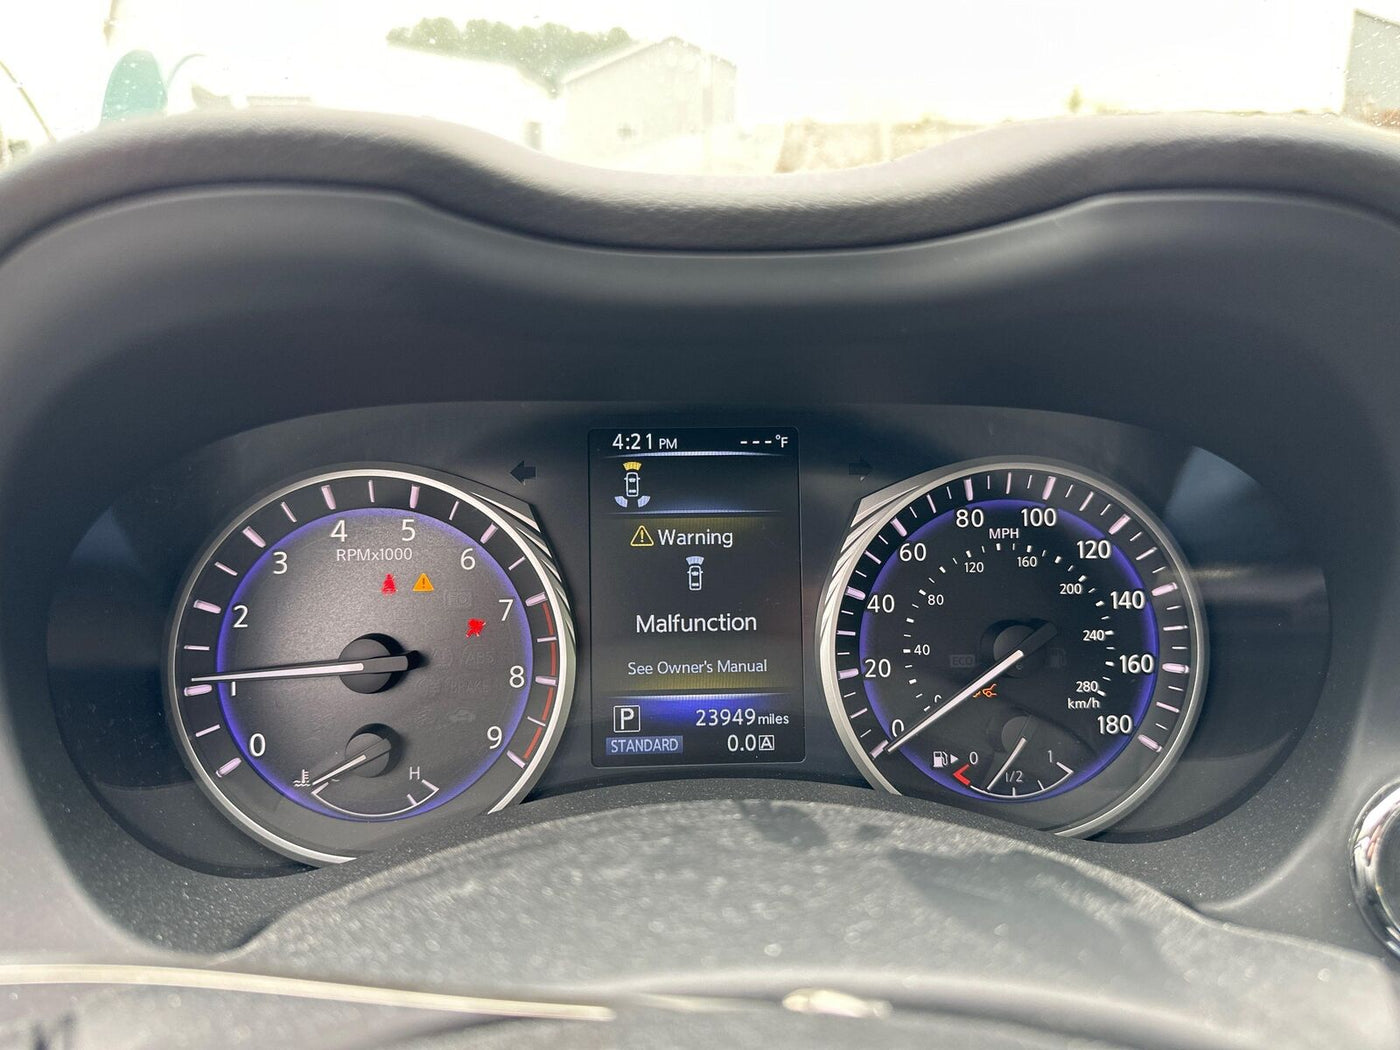 2017 Infiniti Q50 180MPH OME Speedometer Gauge Cluster (Tested) 3.0L Turbo